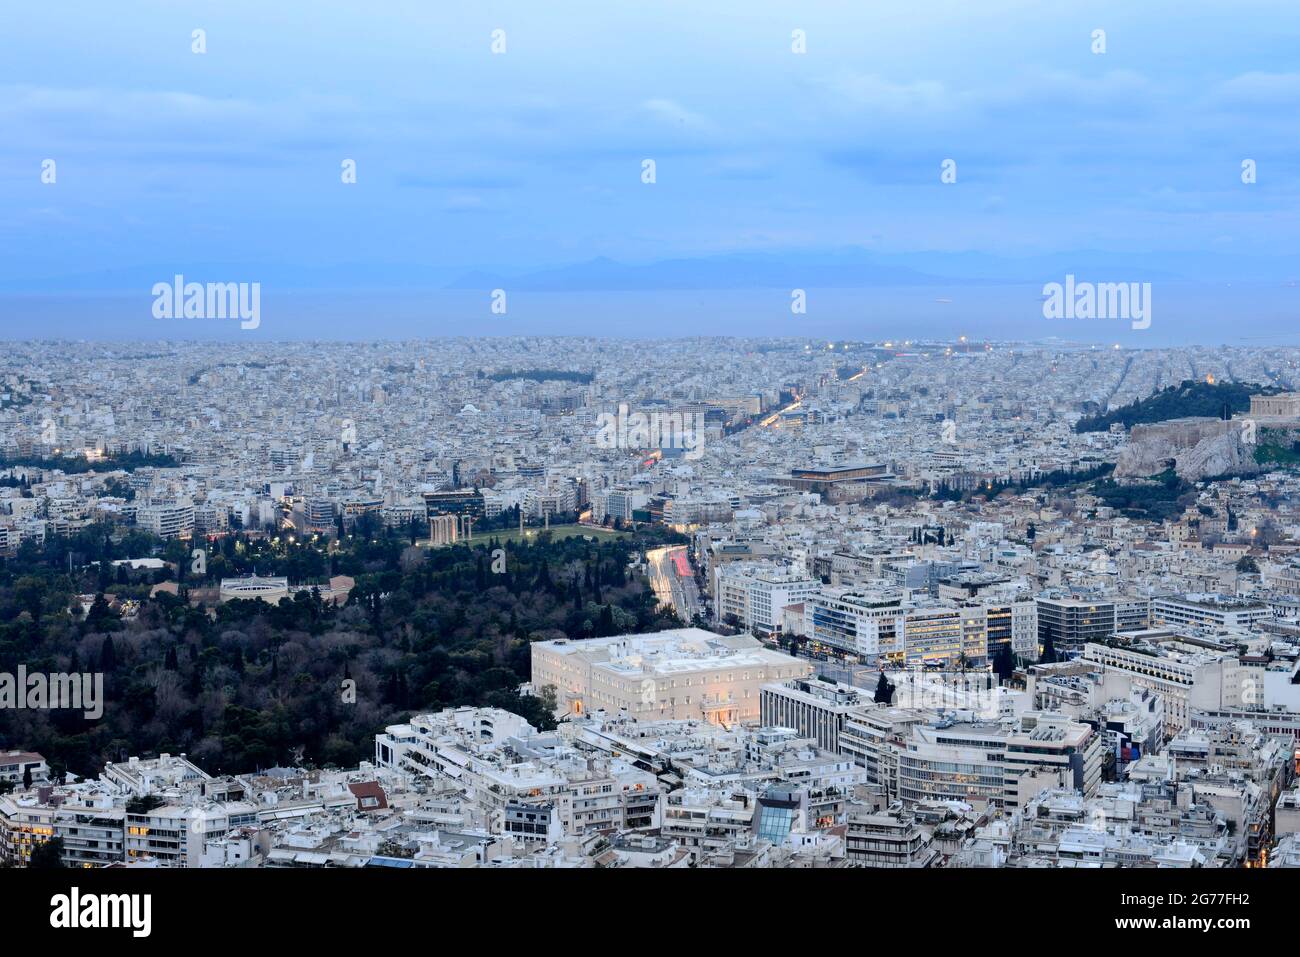 City views of Athens as seen from the top of the Lycabettus hill. Stock Photo